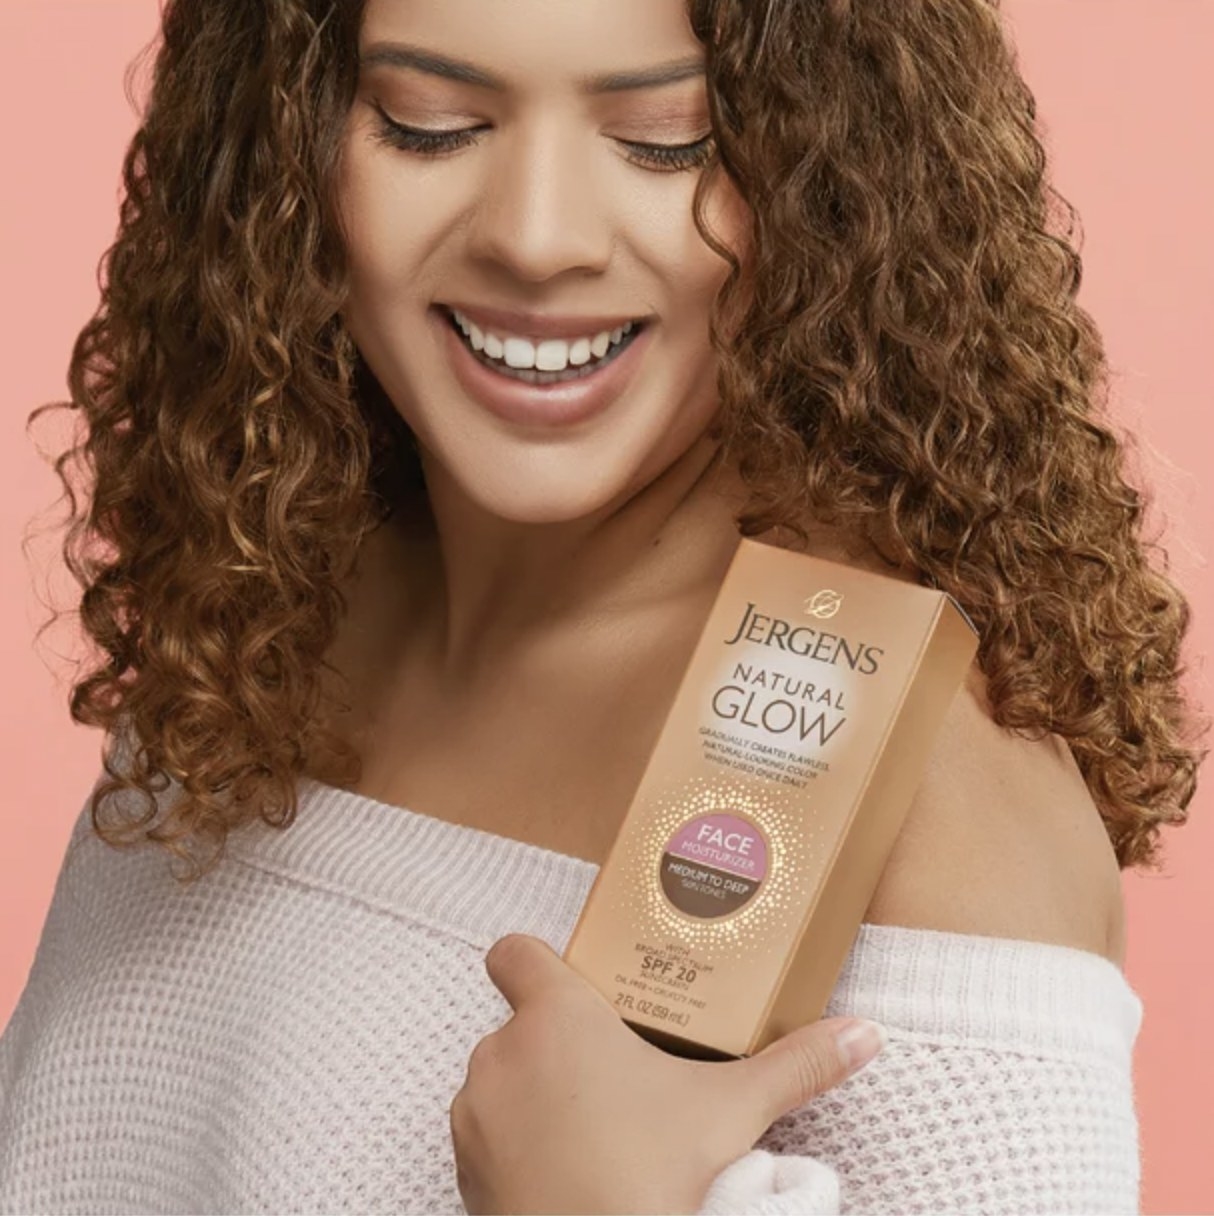 A person holding a package of self-tanner